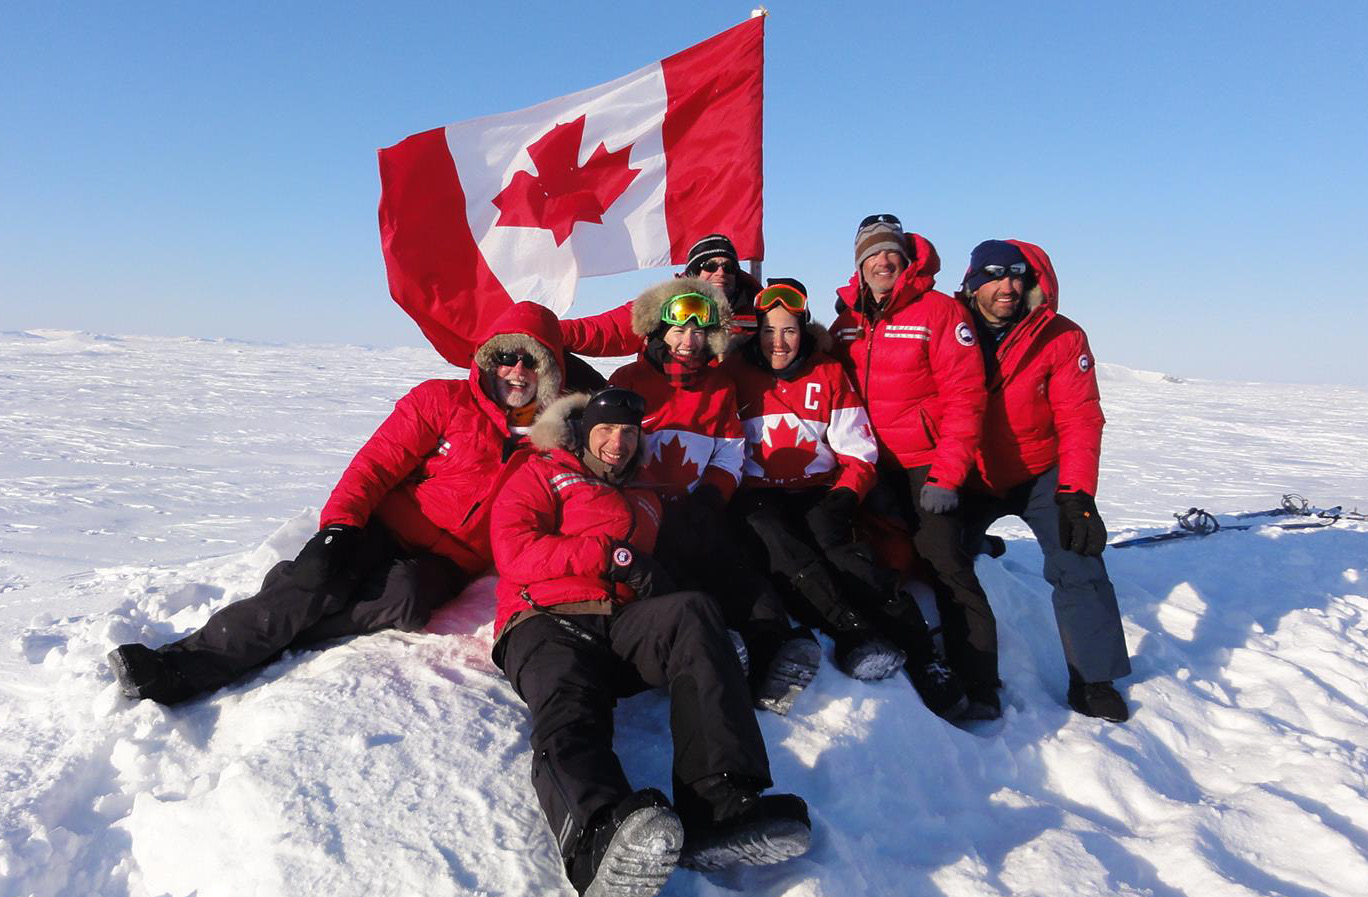 Jim Leech (far left) and teammates at the Magnetic North Pole